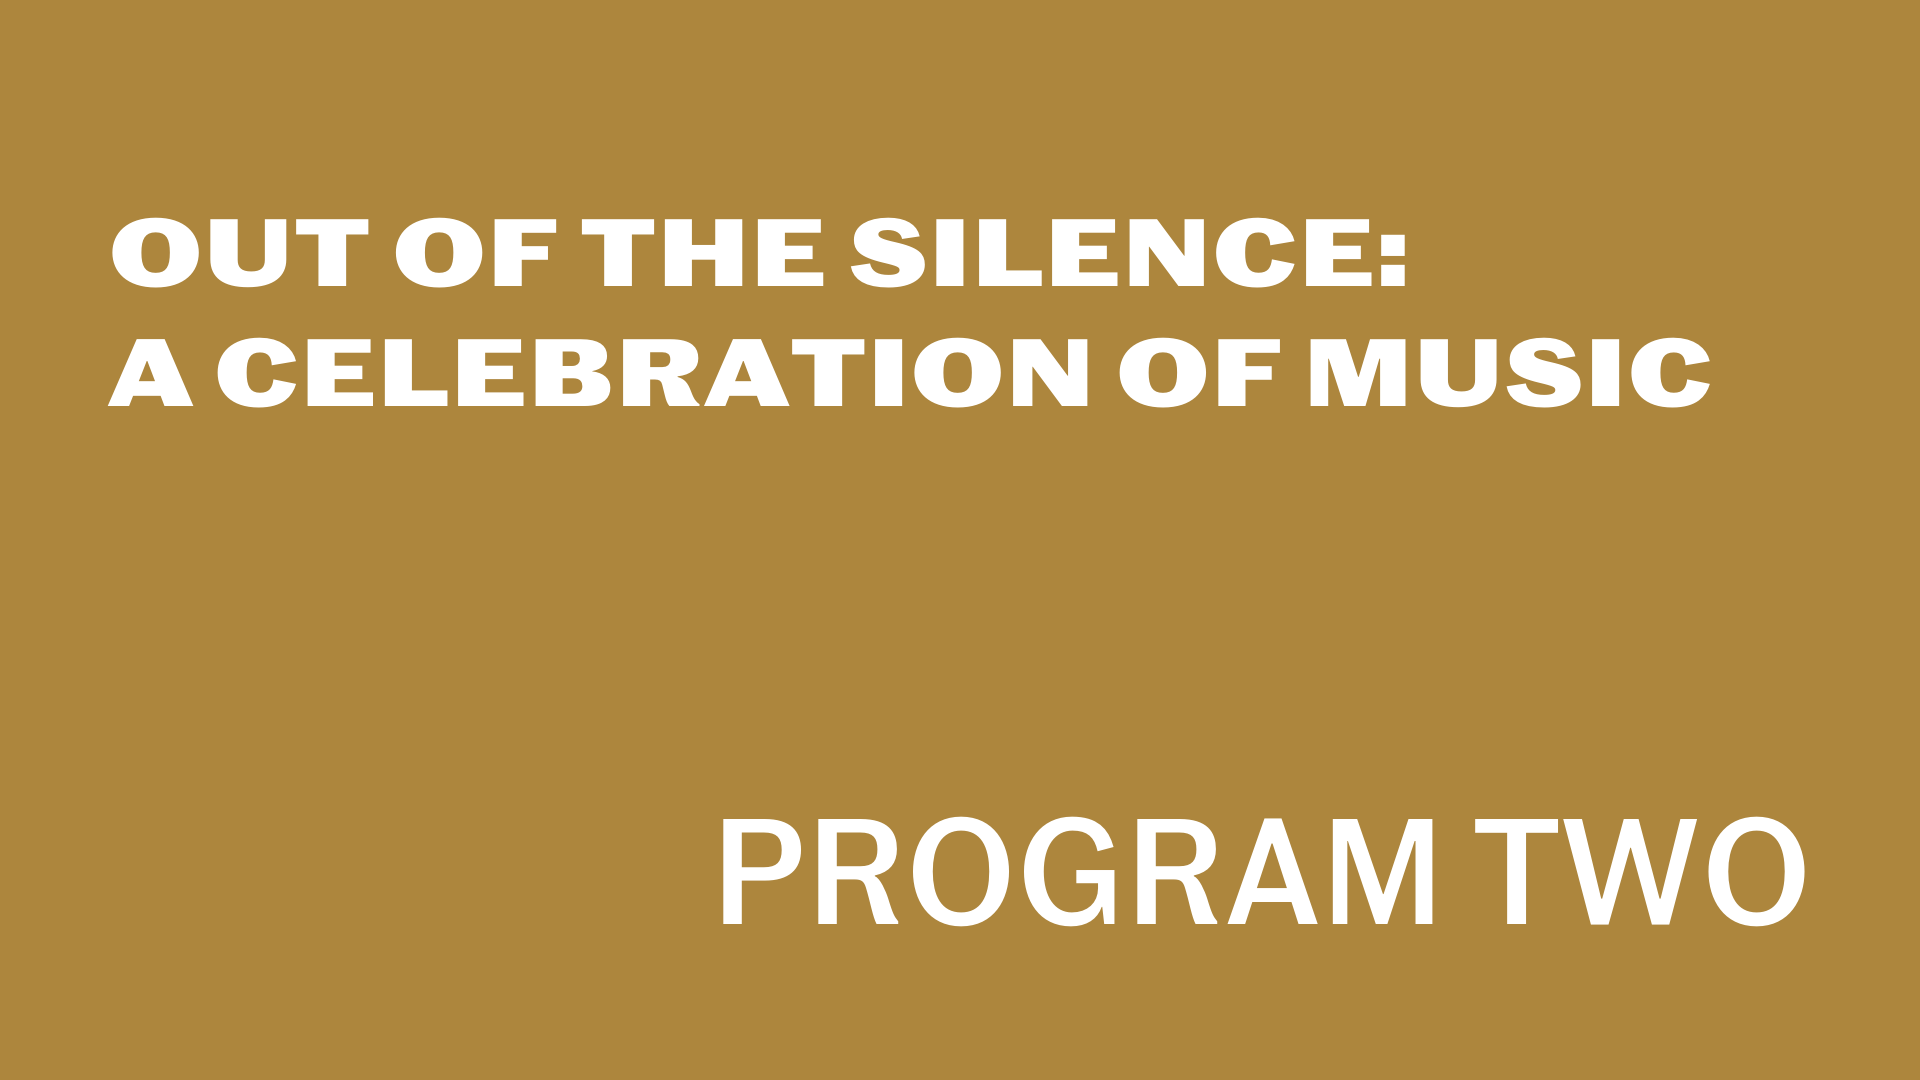 Visit https://fishercenter.bard.edu/events/out-of-the-silence-2/